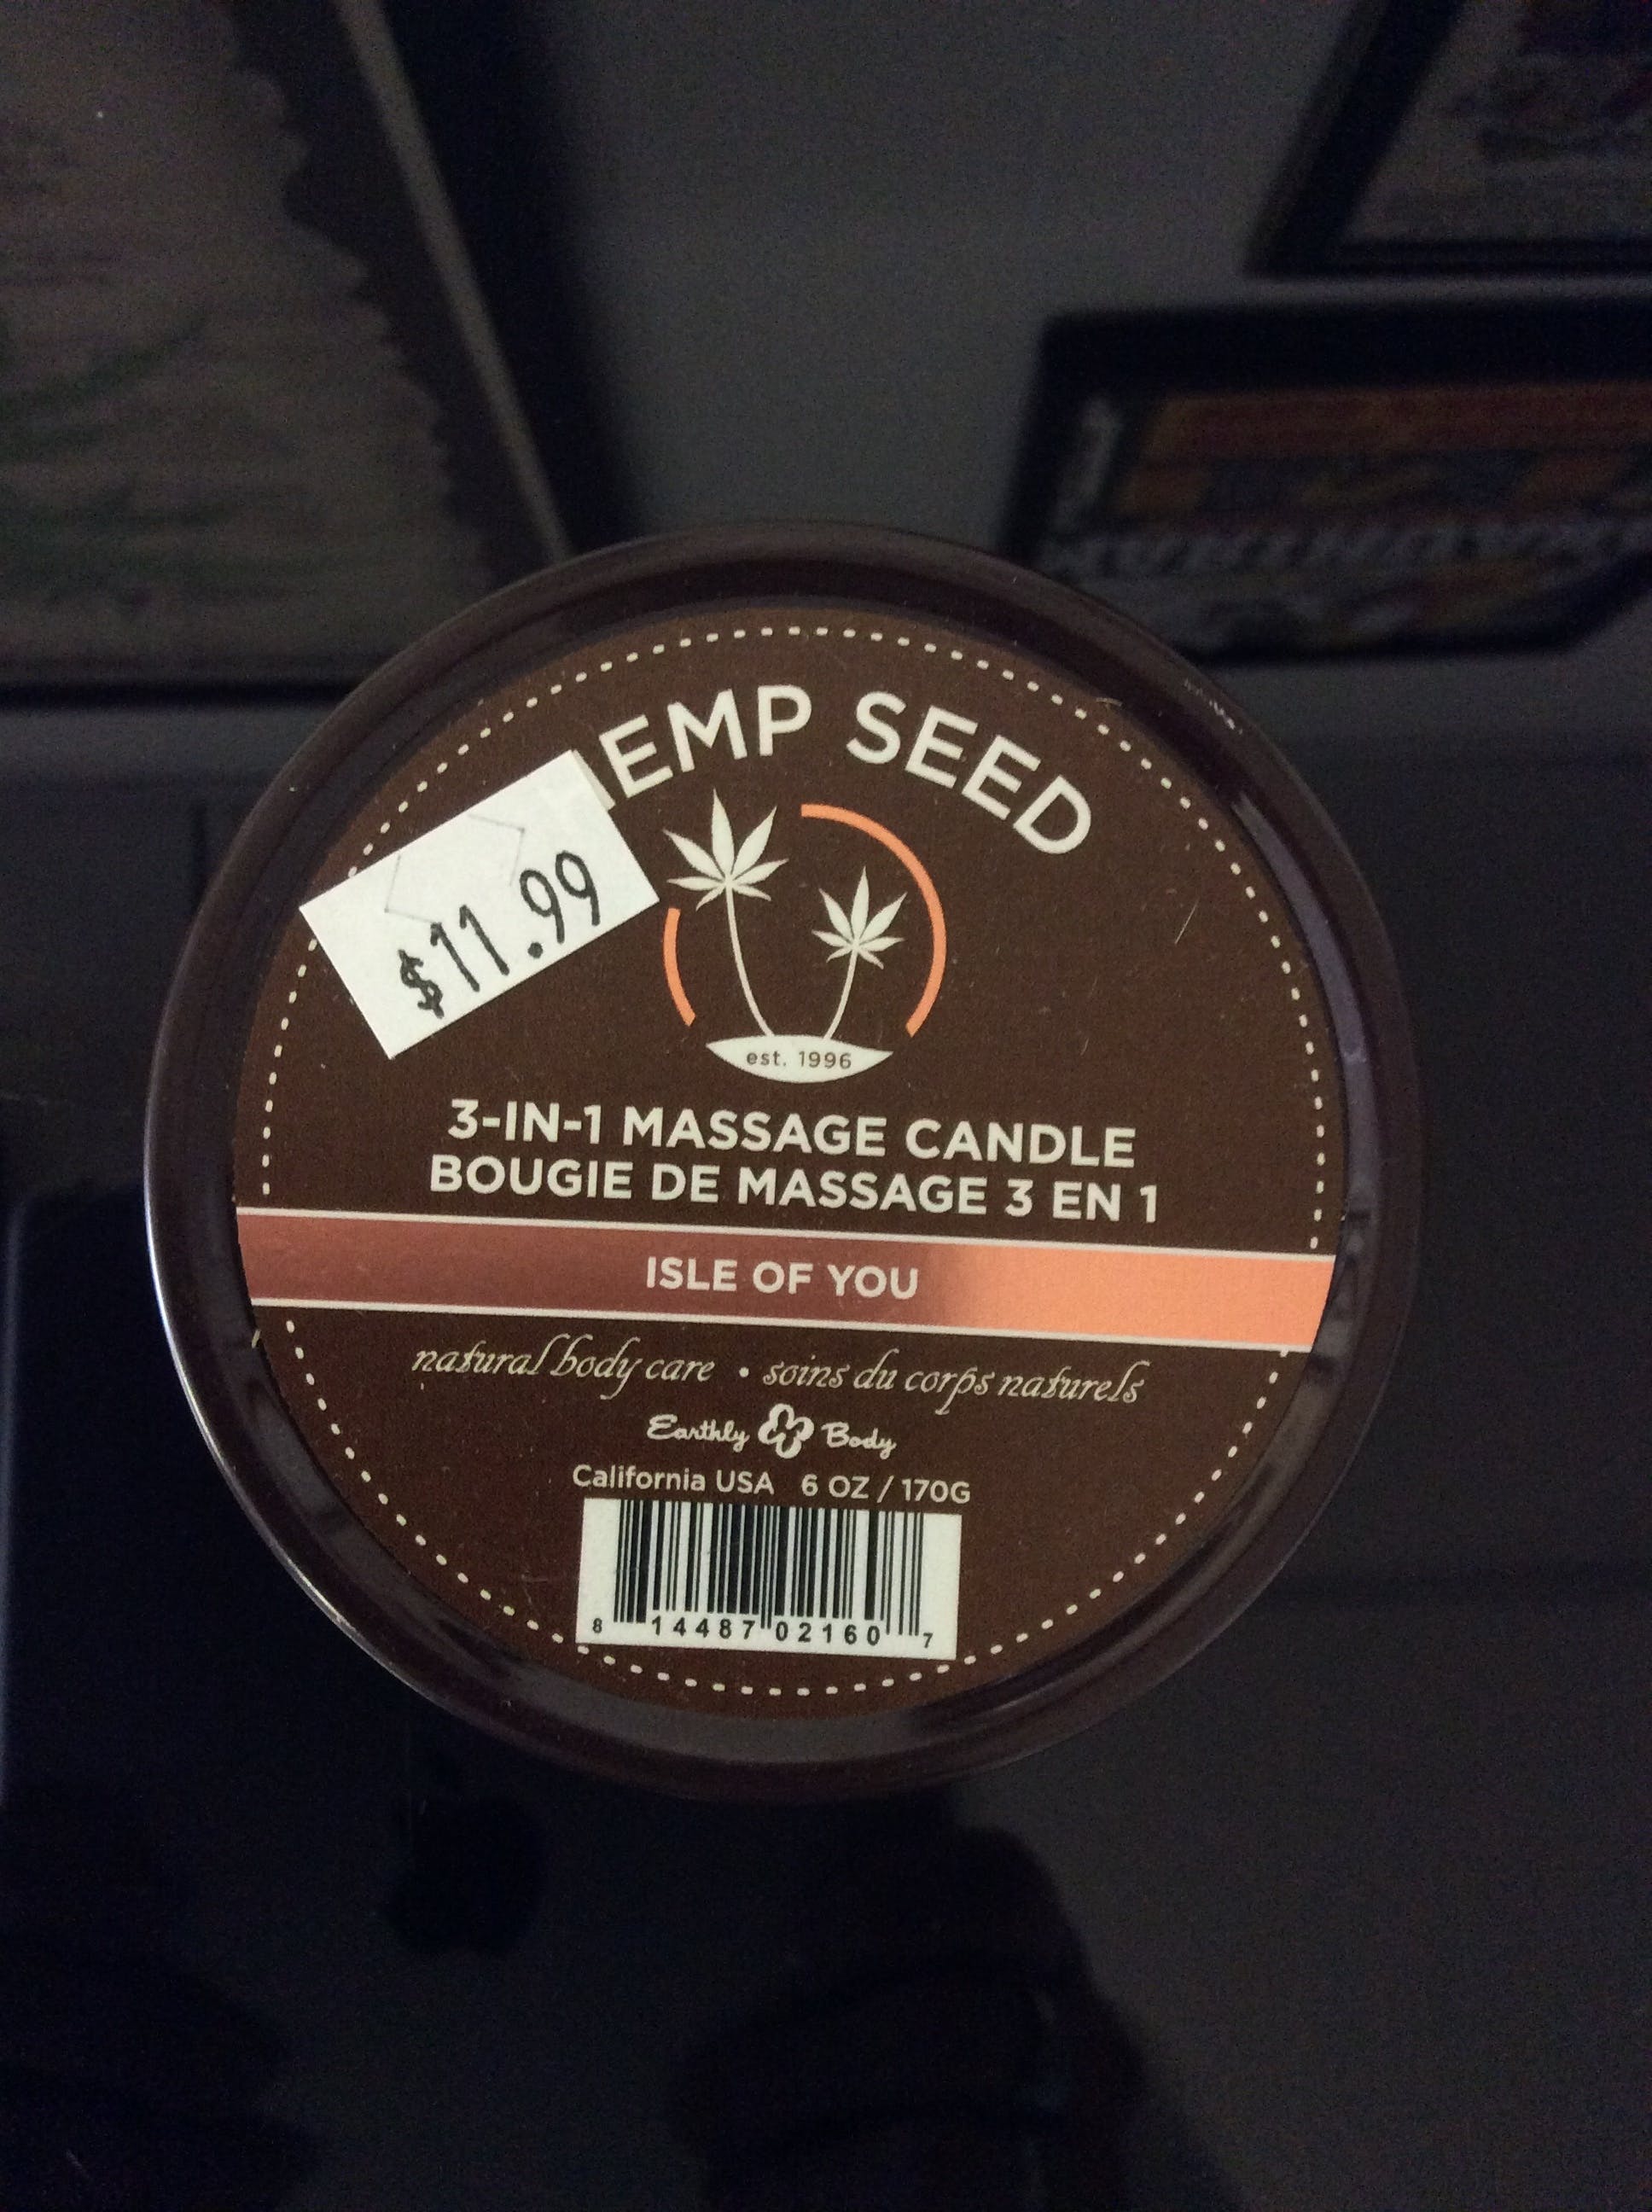 gear-3-in-1-massage-candle-isle